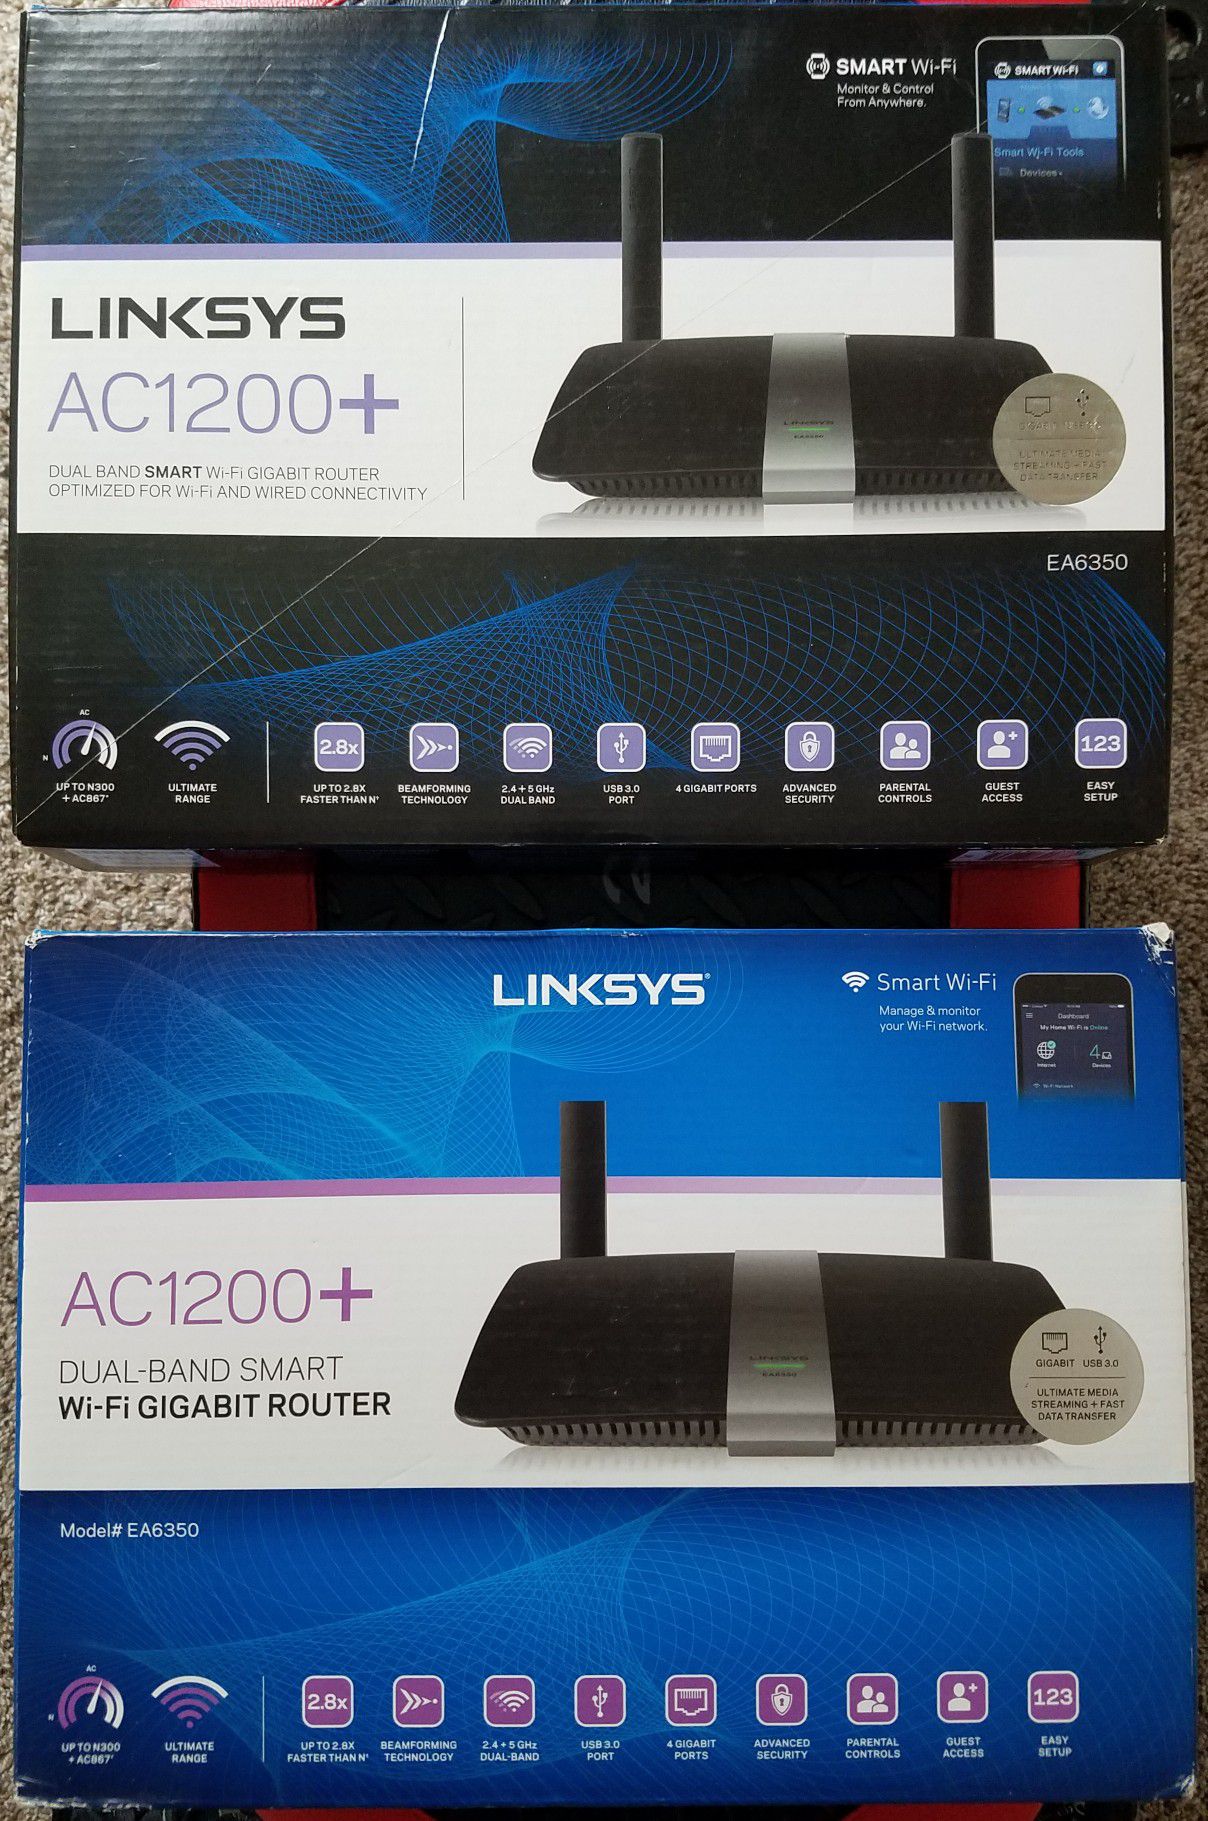 2 LINKSYS Wi-Fi GIGABIT Routers